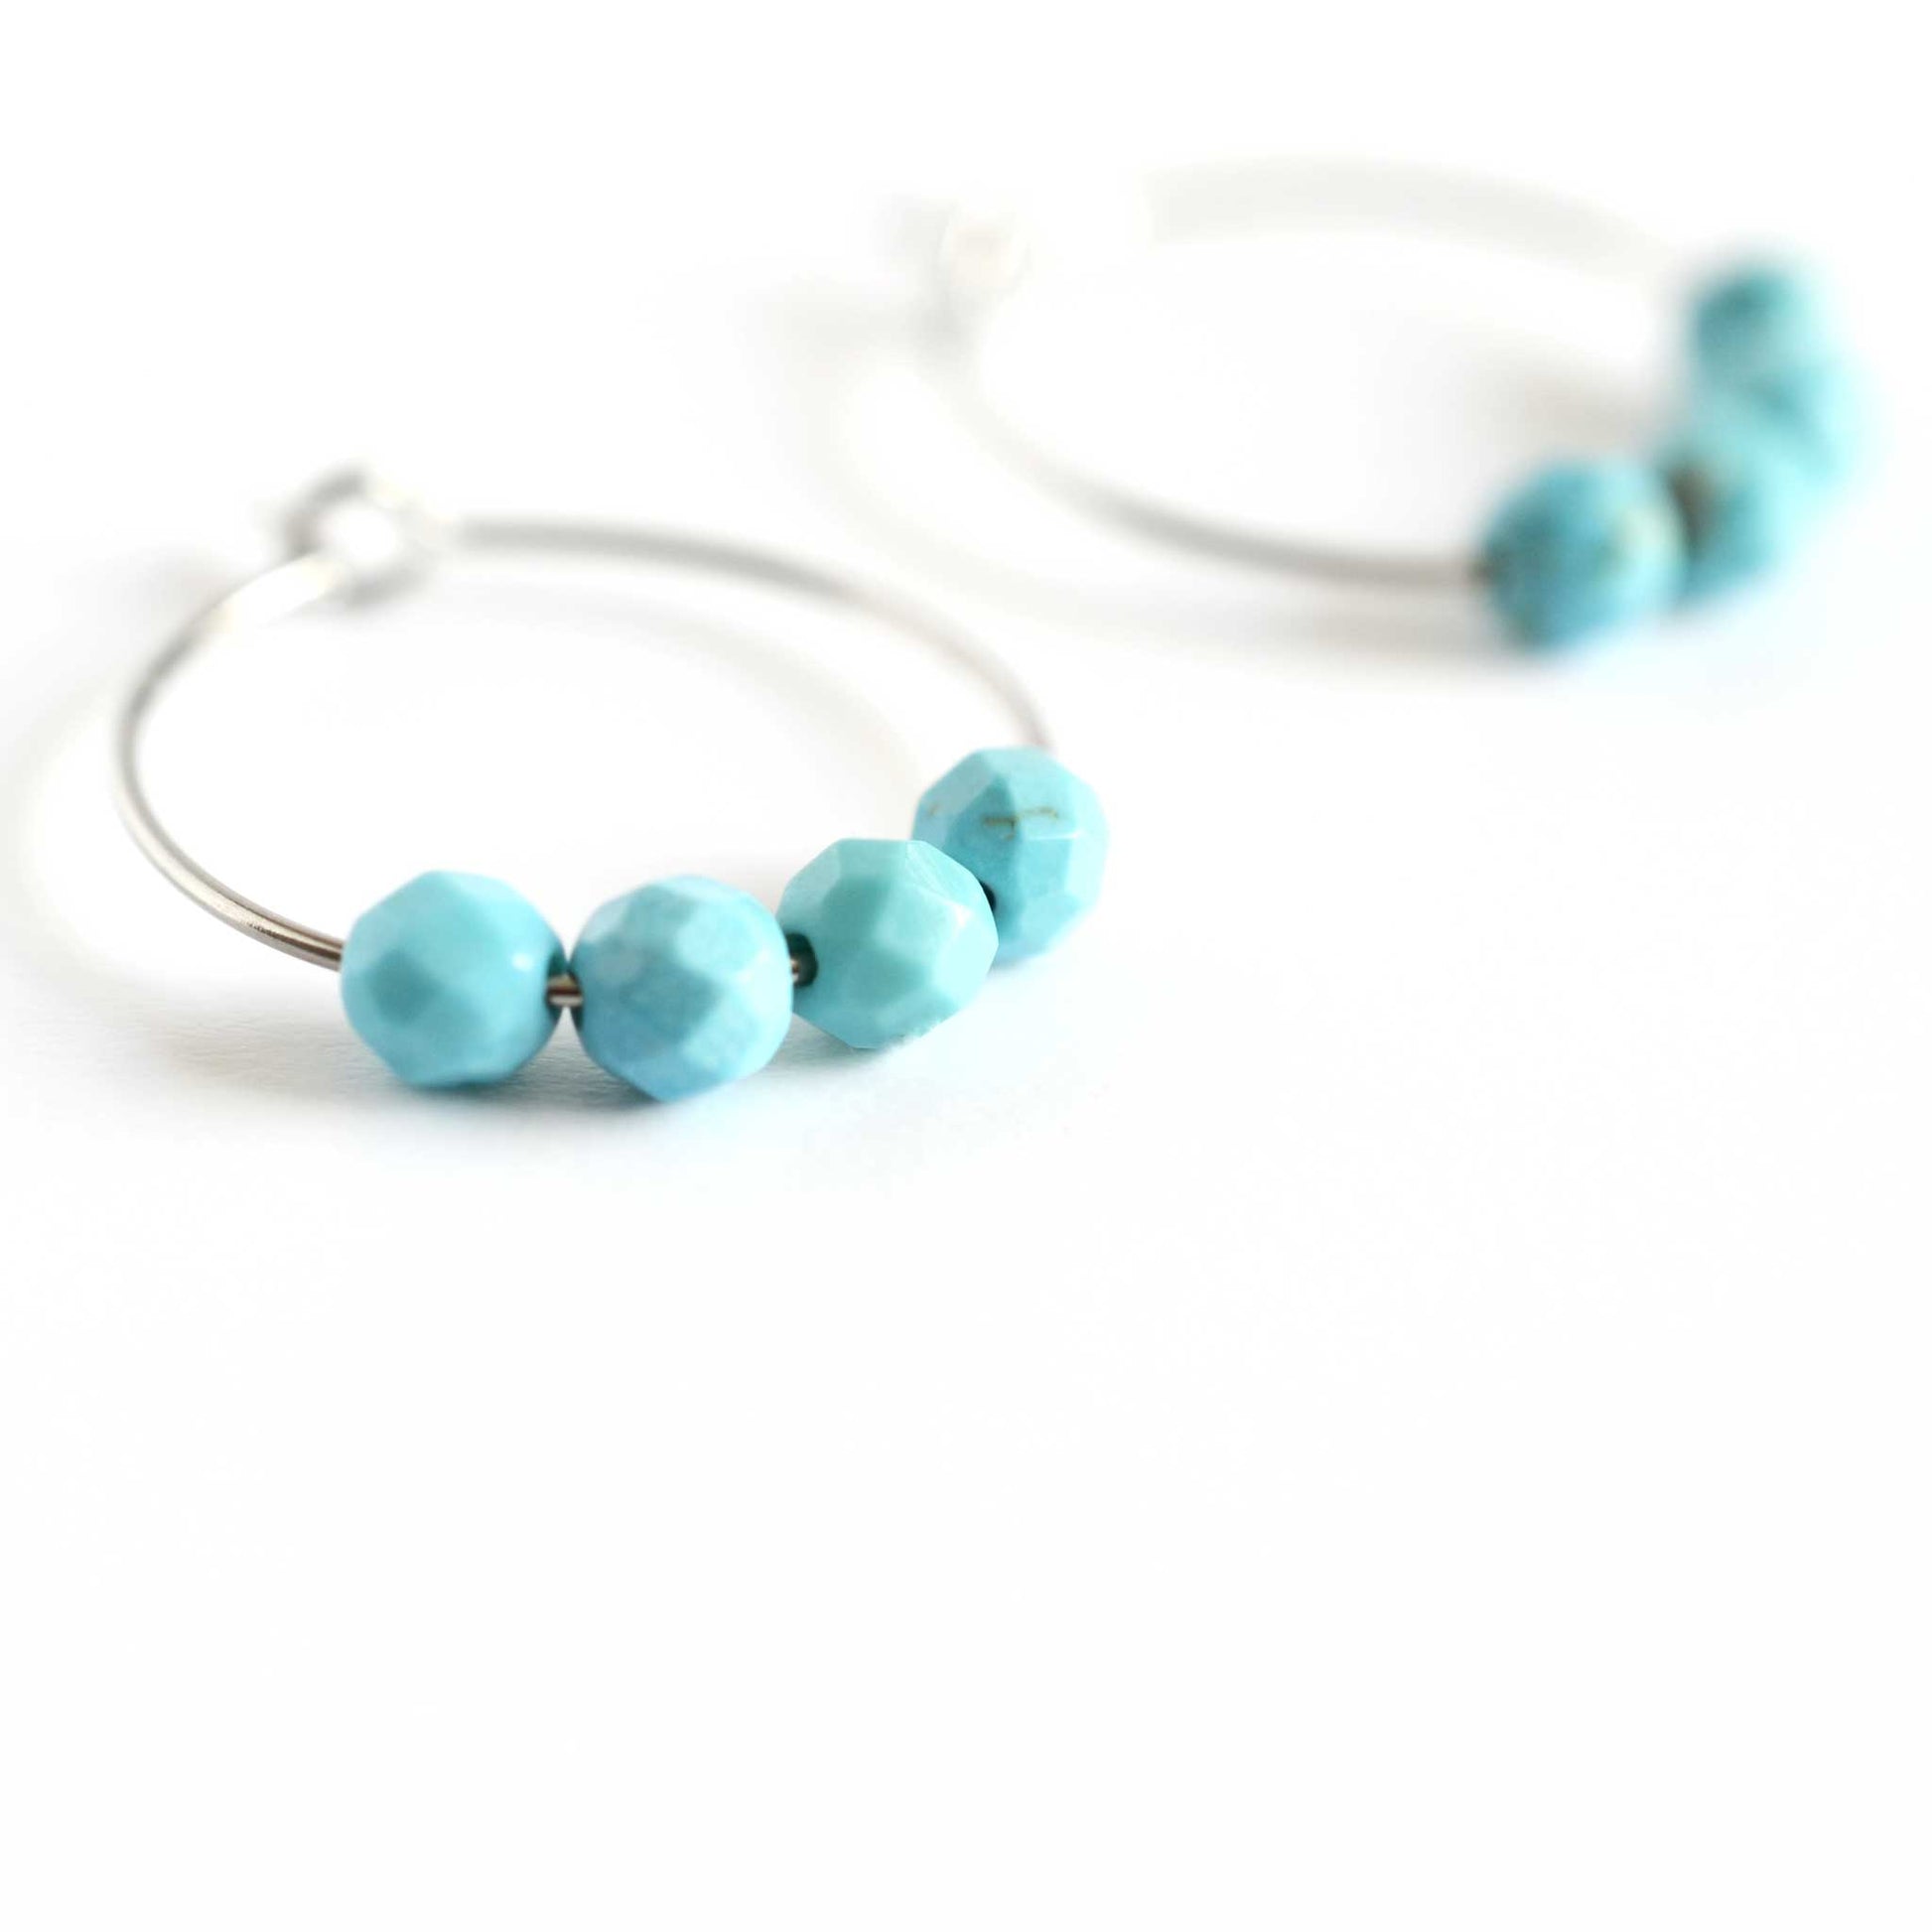 Close up image of Turquoise hoops with four faceted round Turquoise gemstone beads